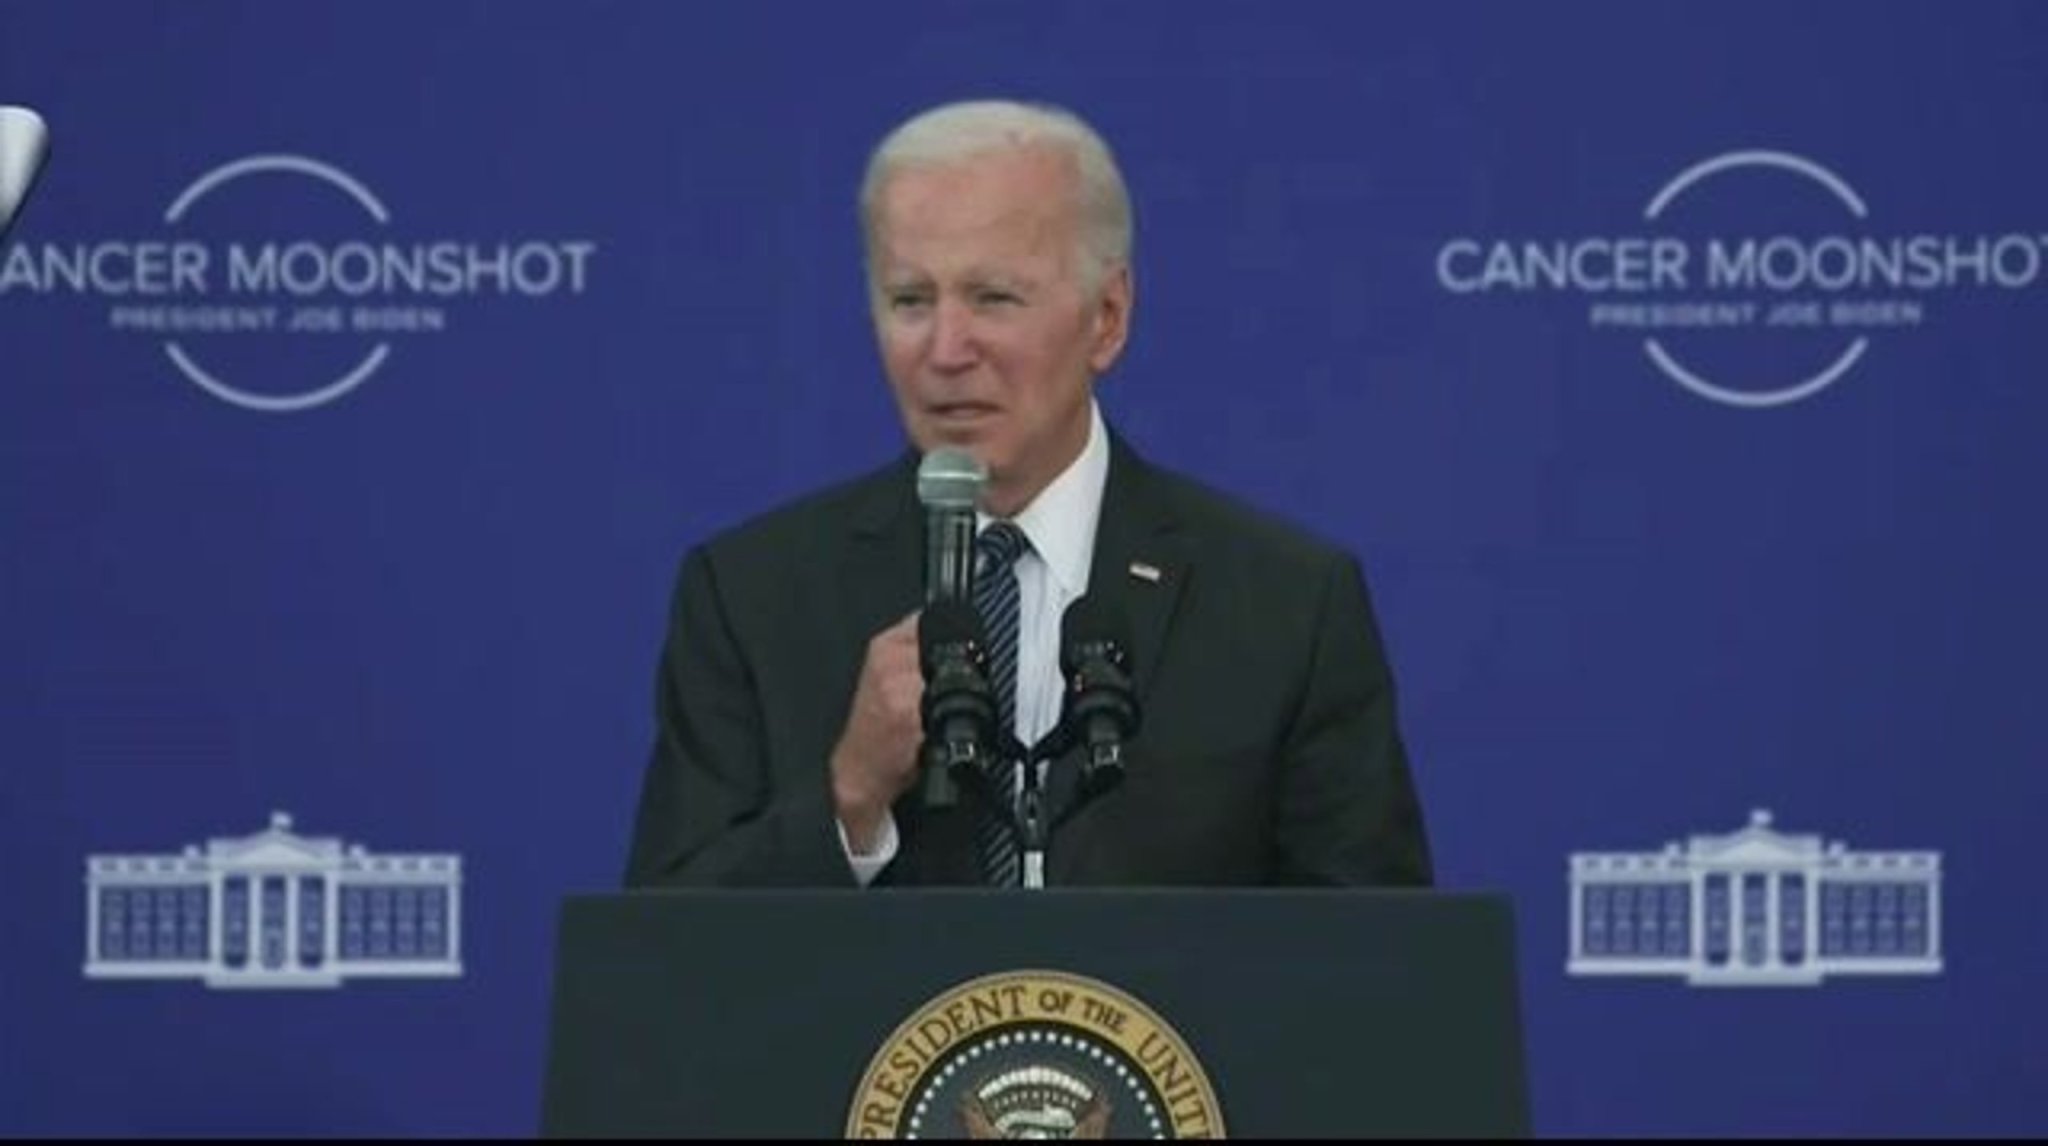 President Biden says his "Cancer Moonshot" initiative is one of the reasons why he ran for president.